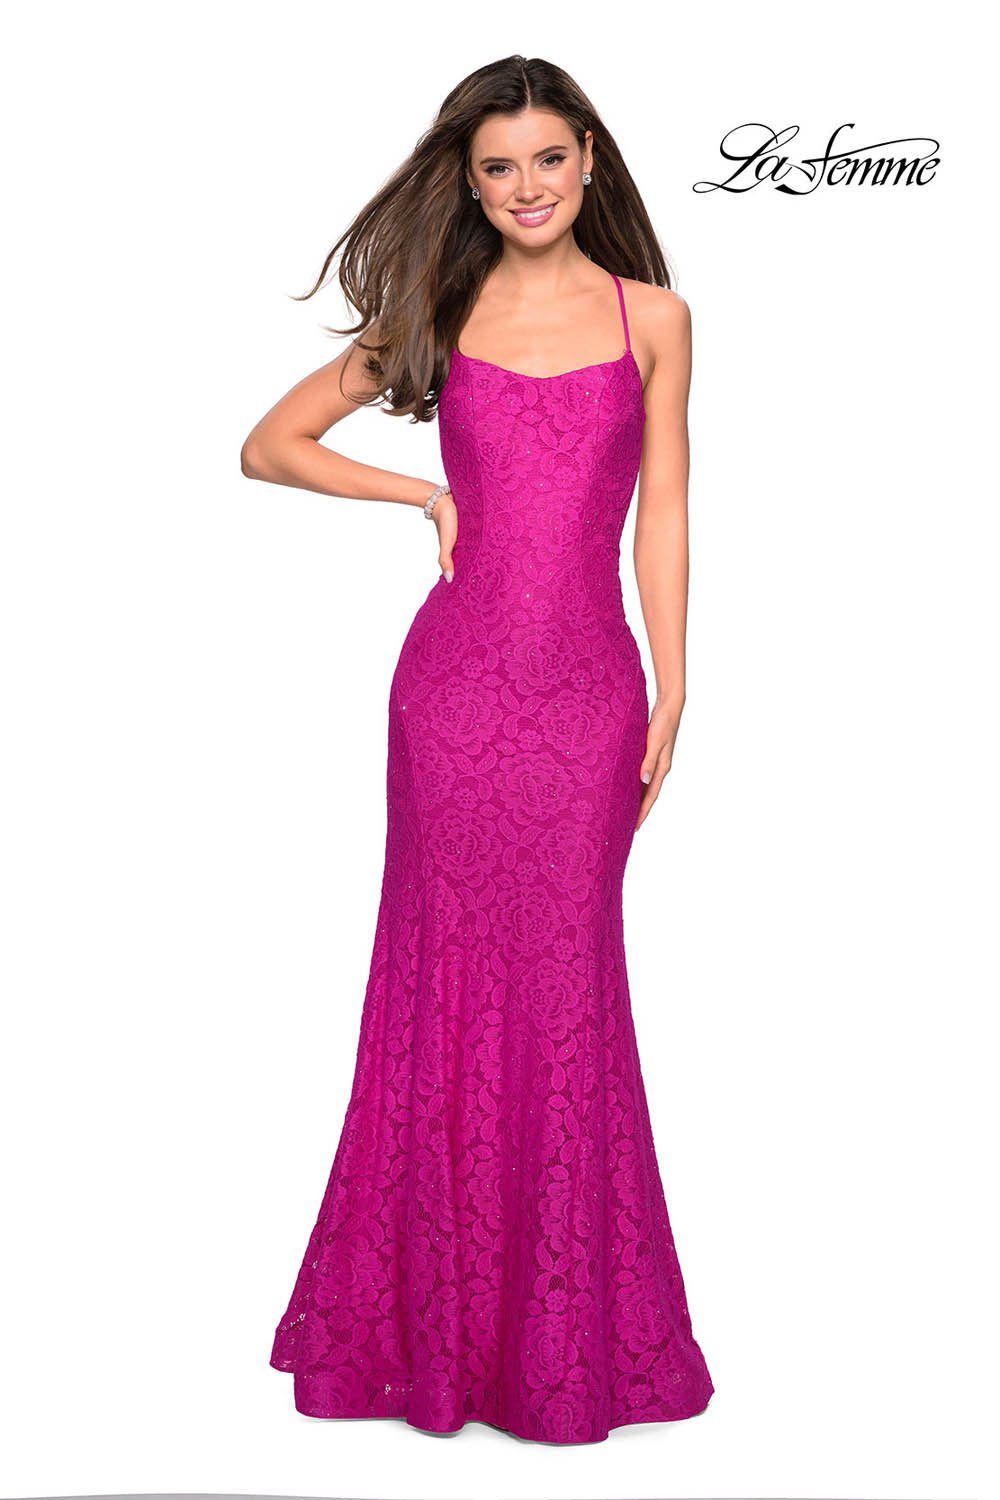 La Femme 27565 dress images in these colors: Gunmetal, Hot Pink, Navy, Periwinkle, White, Yellow.